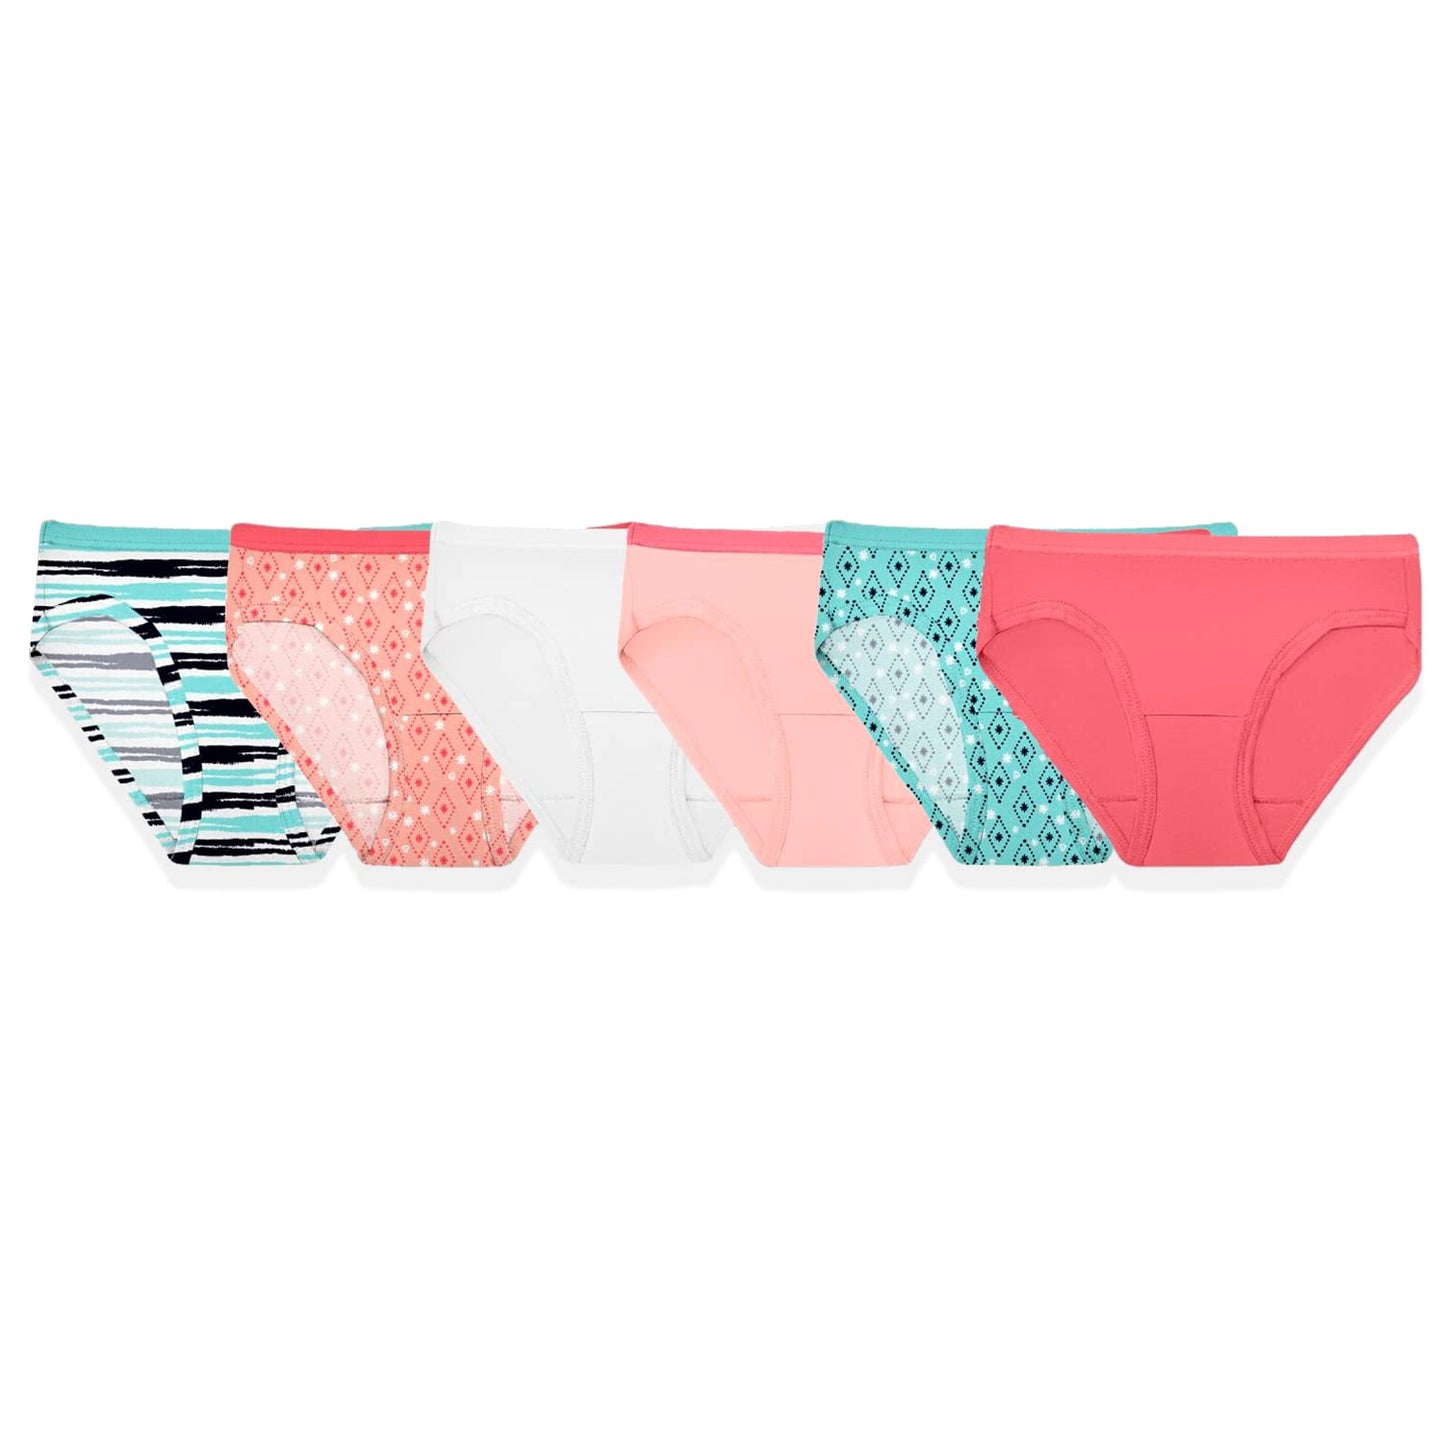 Fruit of the Loom Girls' Cotton Hipster Underwear, 20 Pack-Fashion Assorted, 4